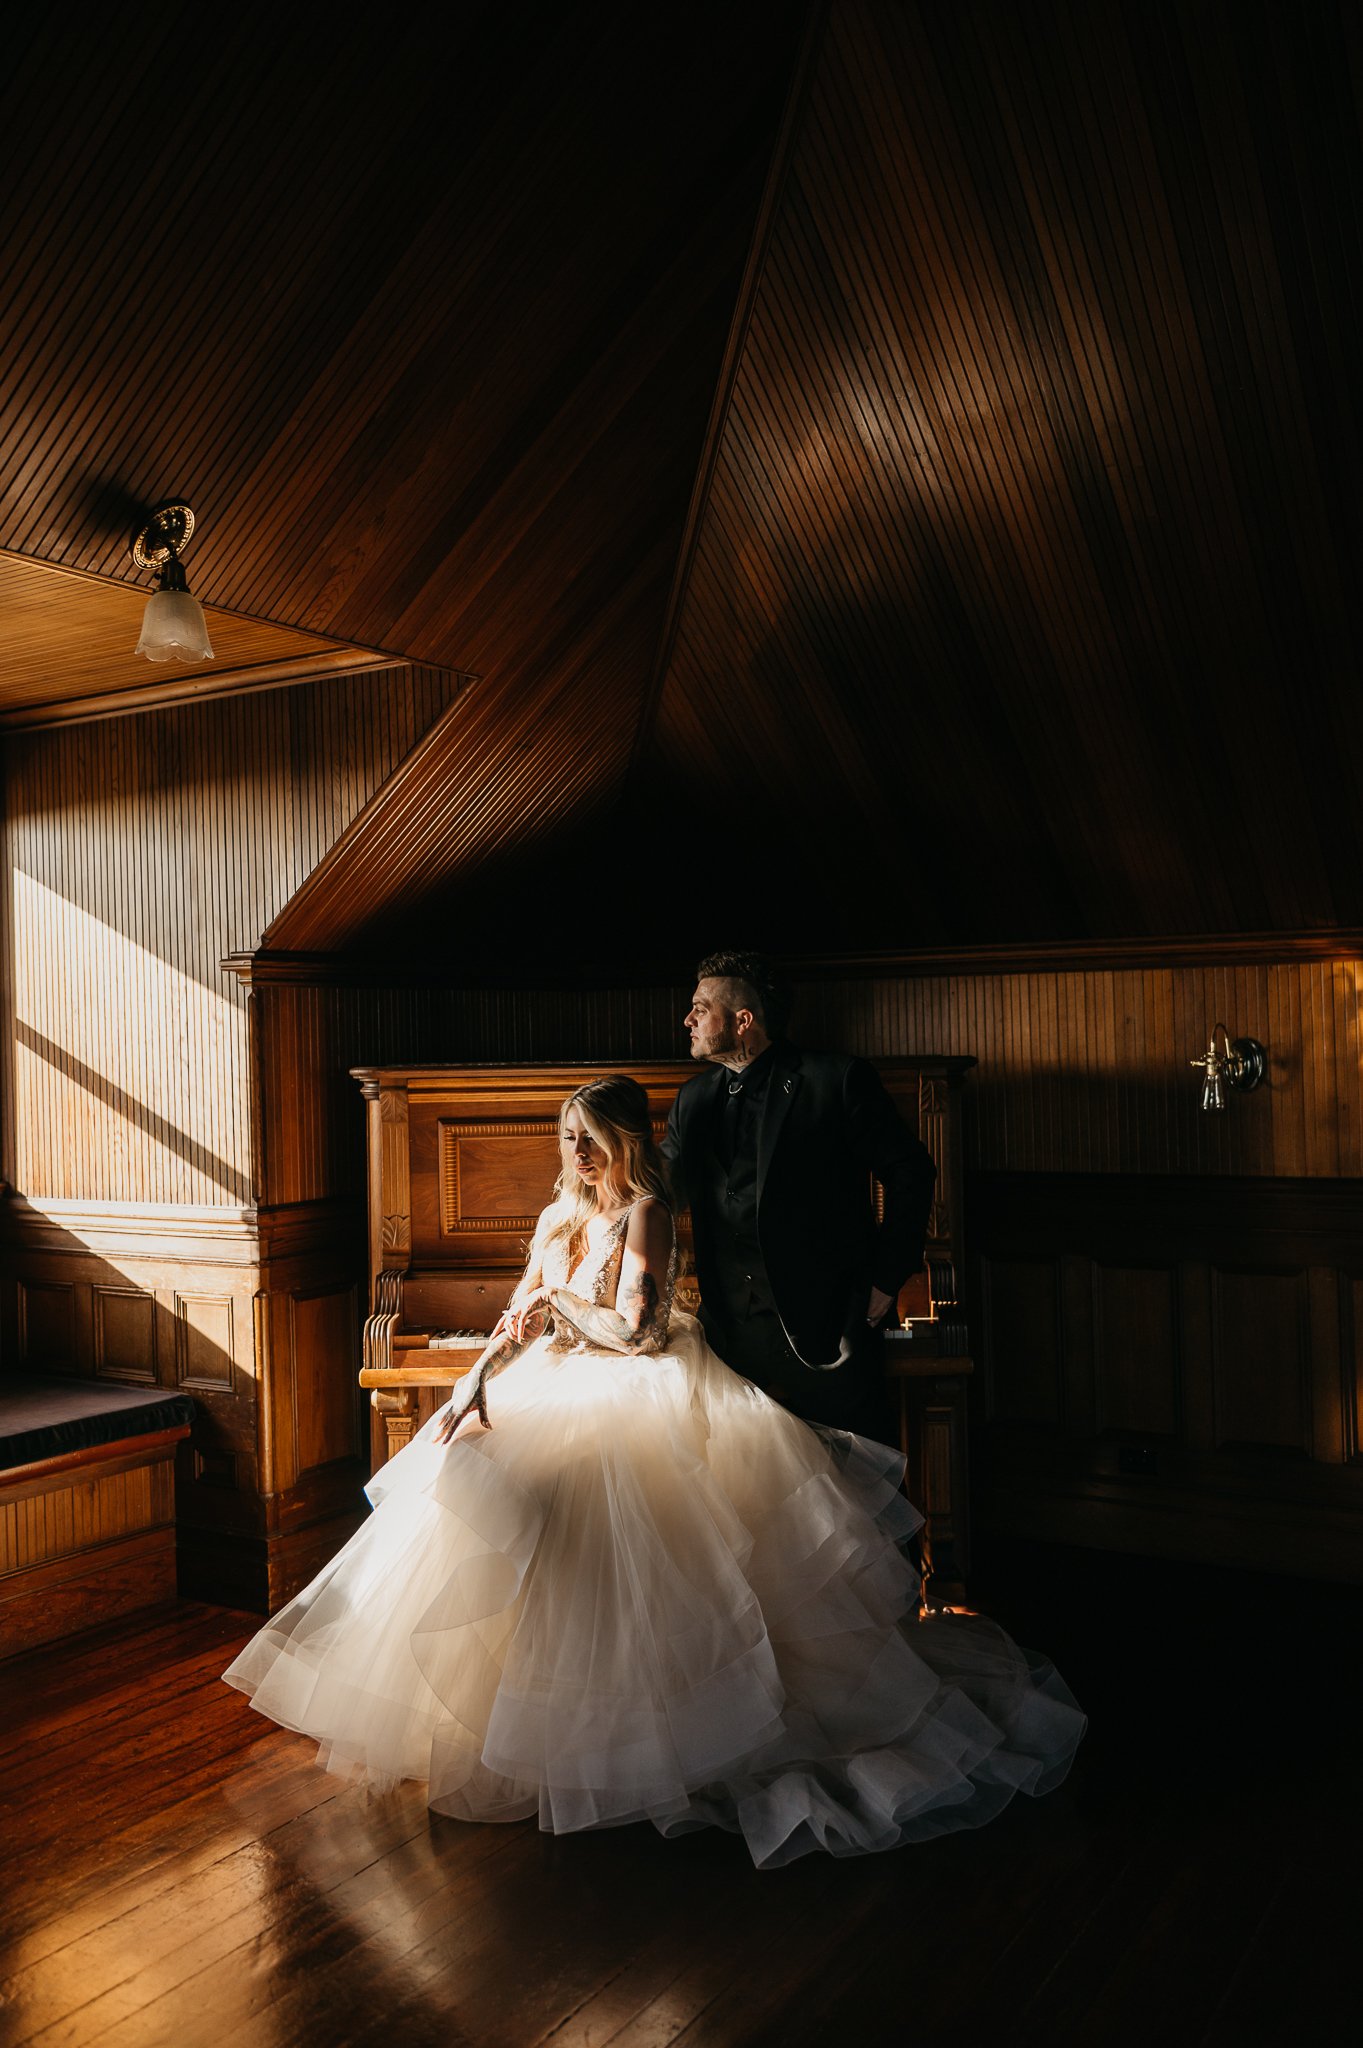 Bride and groom in wedding attire in the ballroom of wedding venue sitting on piano bench overlooking dance floor surrounded by beautiful paneled wood walls.